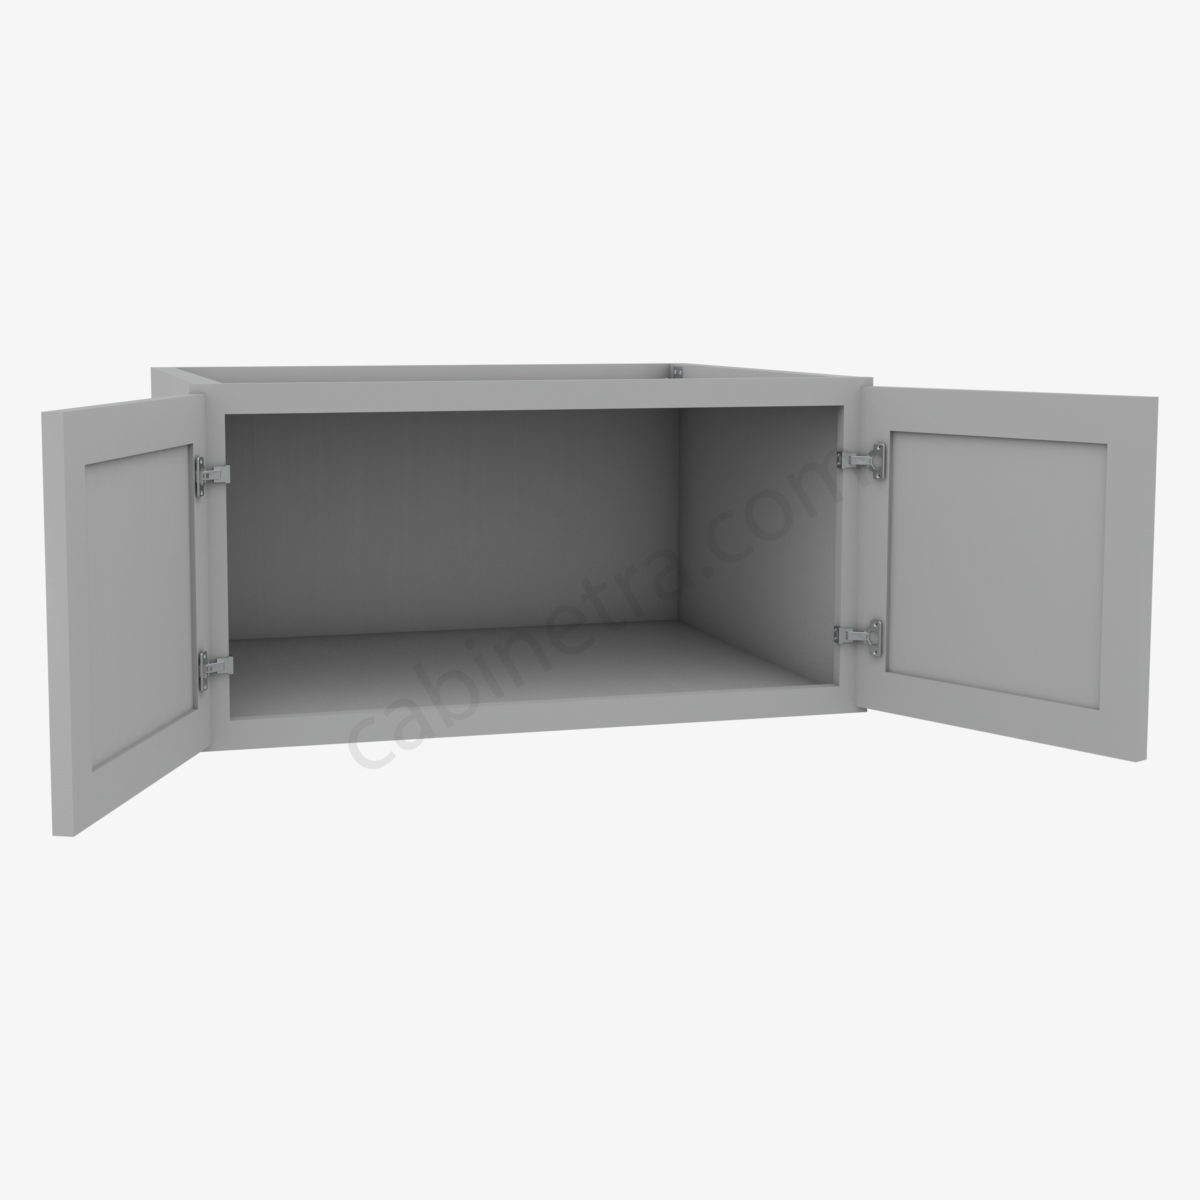 AB W301524B 1 Forevermark Lait Gray Shaker Cabinetra scaled